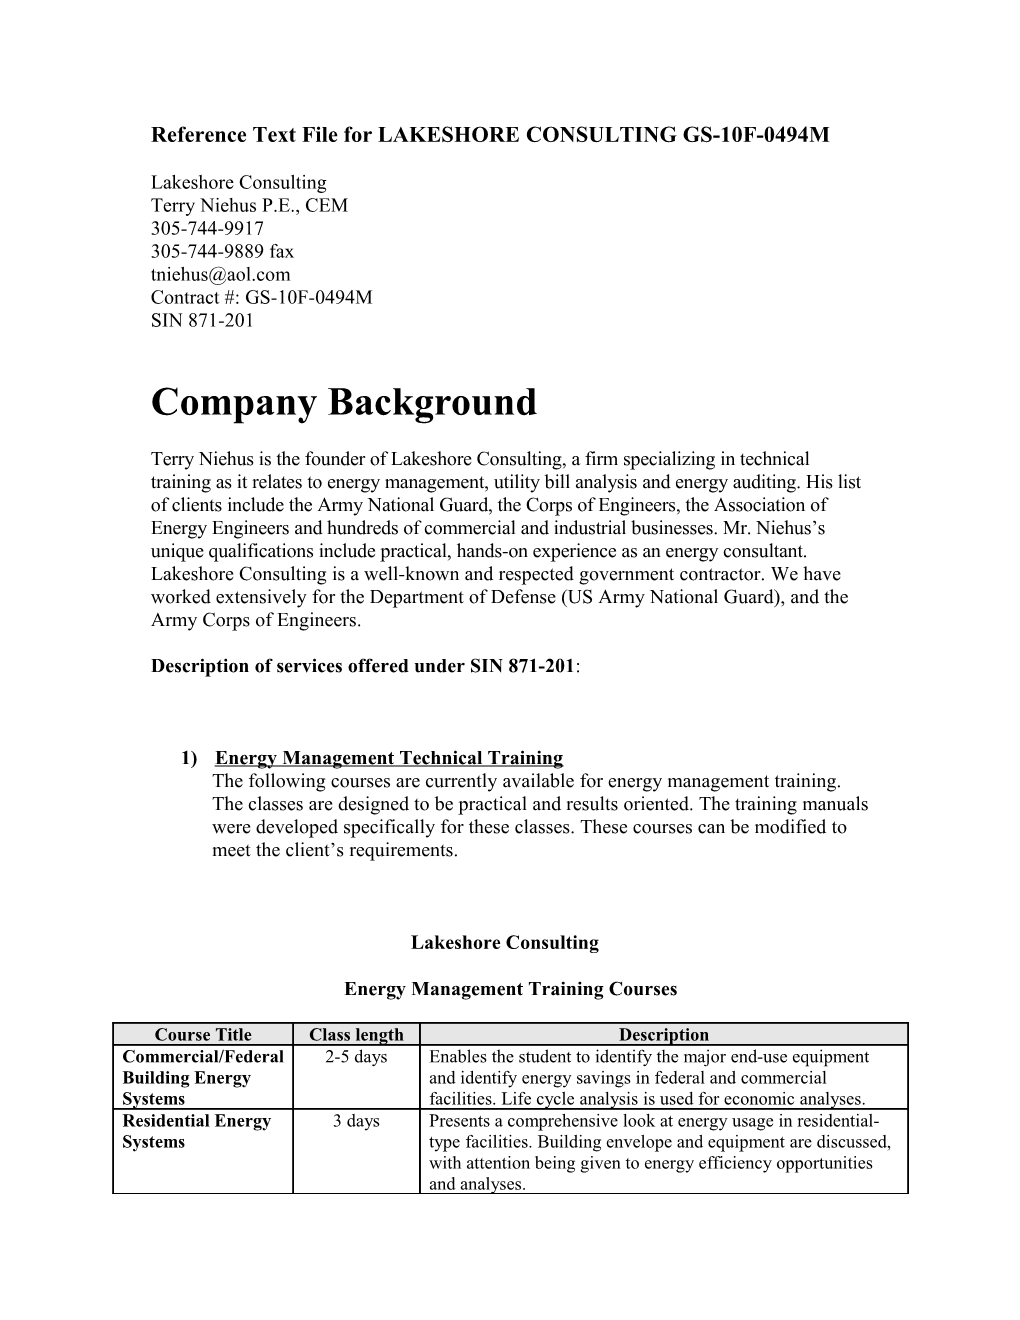 Reference Text File for LAKESHORE CONSULTING GS-10F-0494M